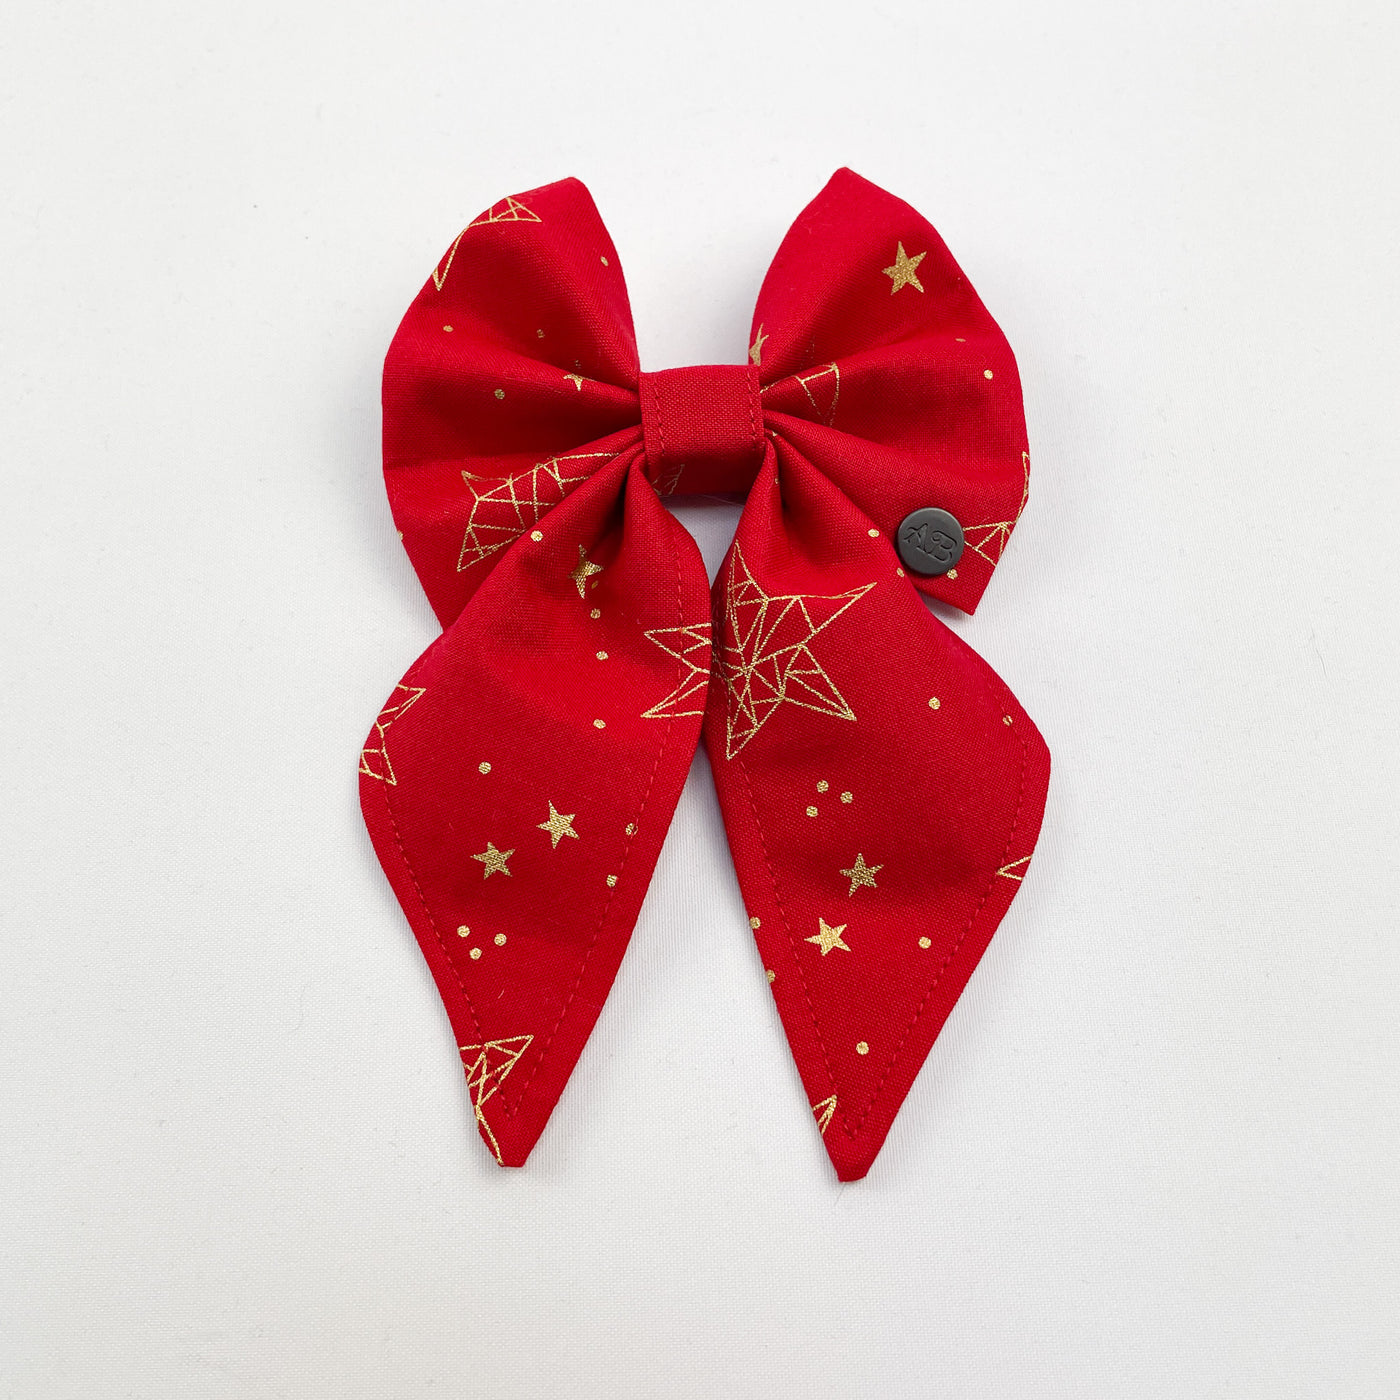 Red star sailor bow tie